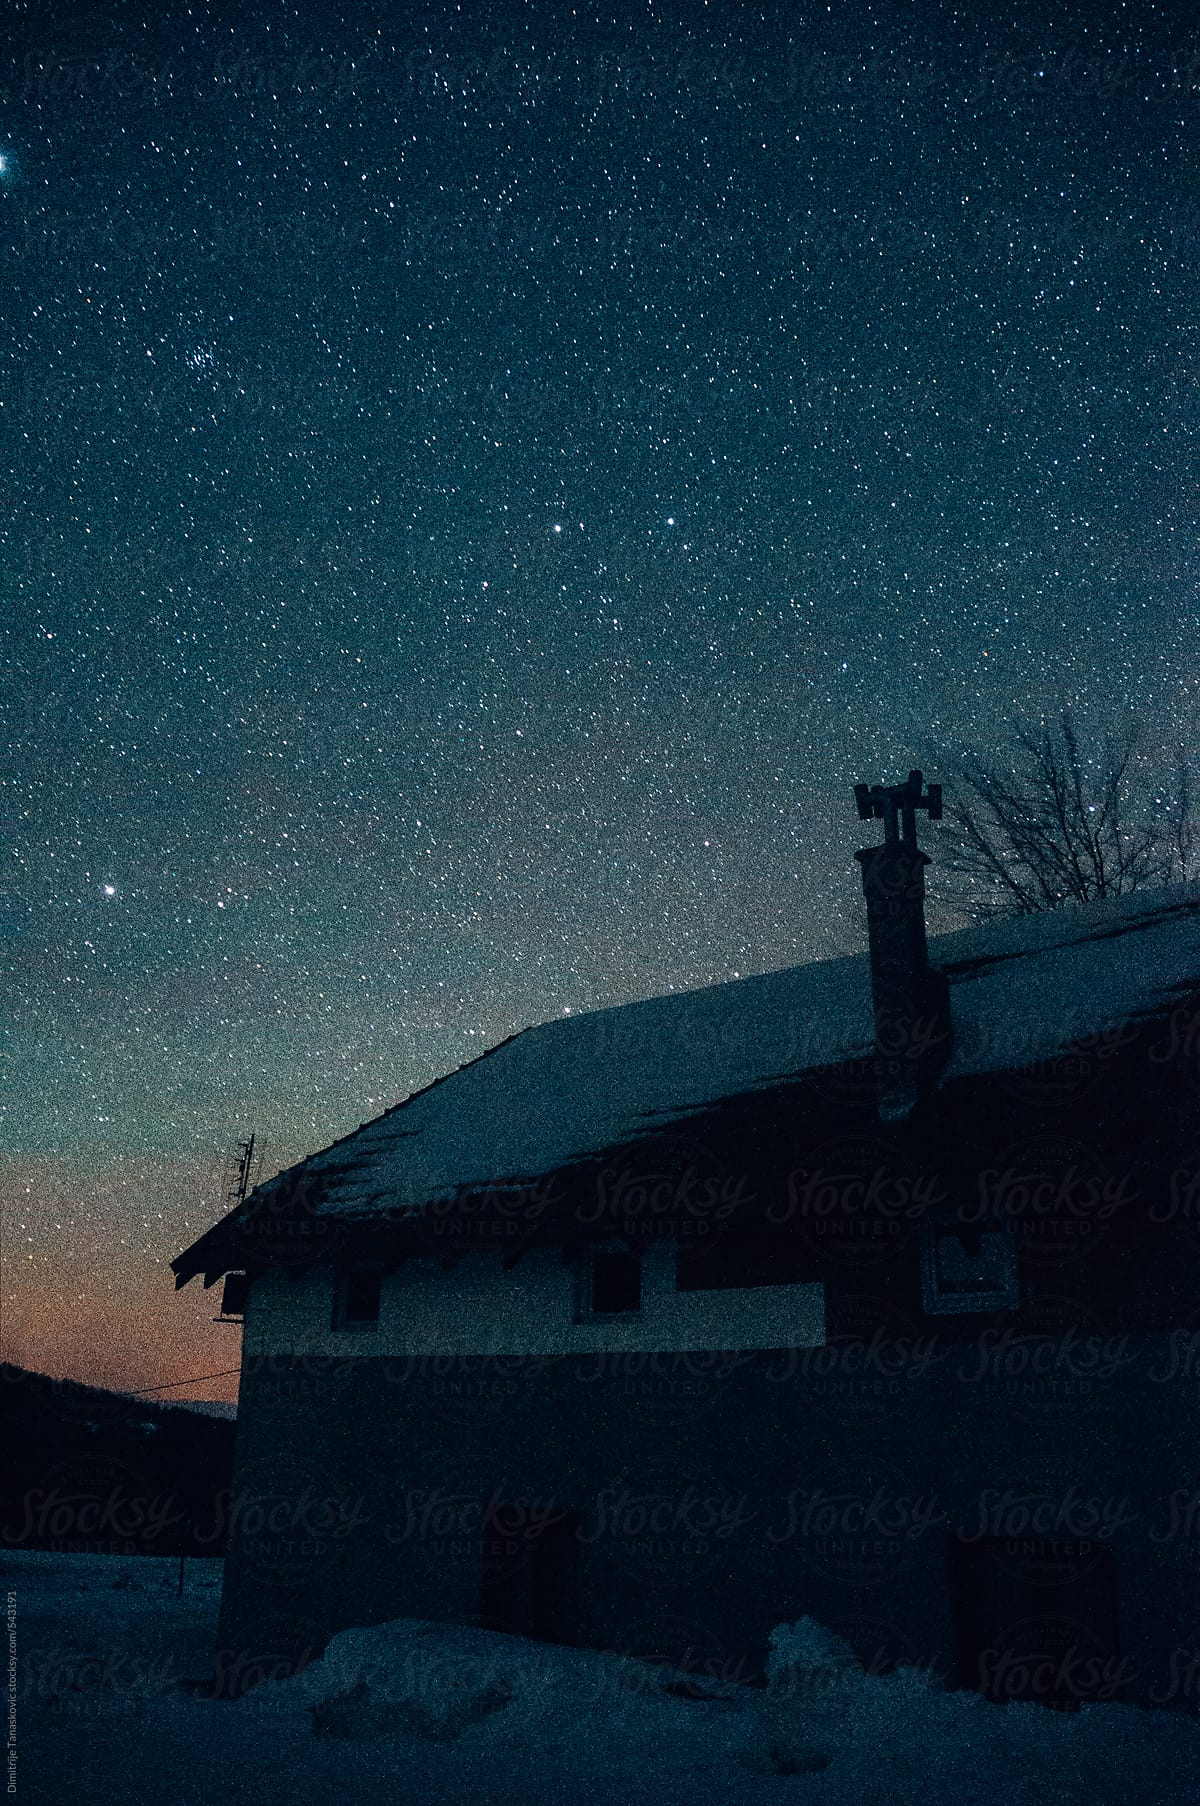 Mountain lodge sillouethe under a starry sky